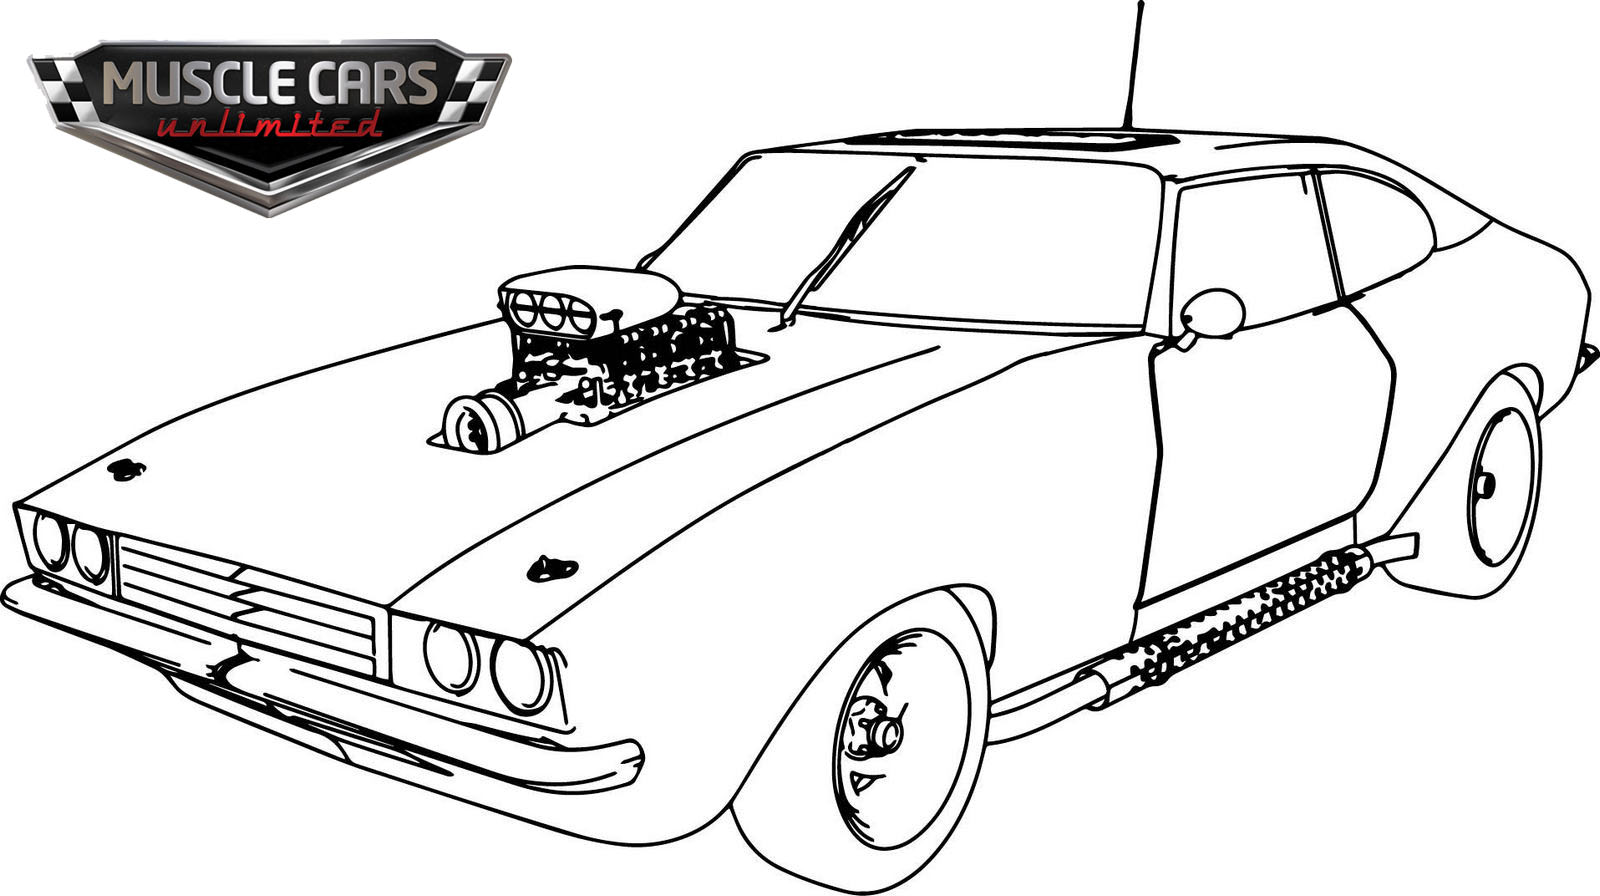 Old Sport Muscle Car Coloring Page for Boys